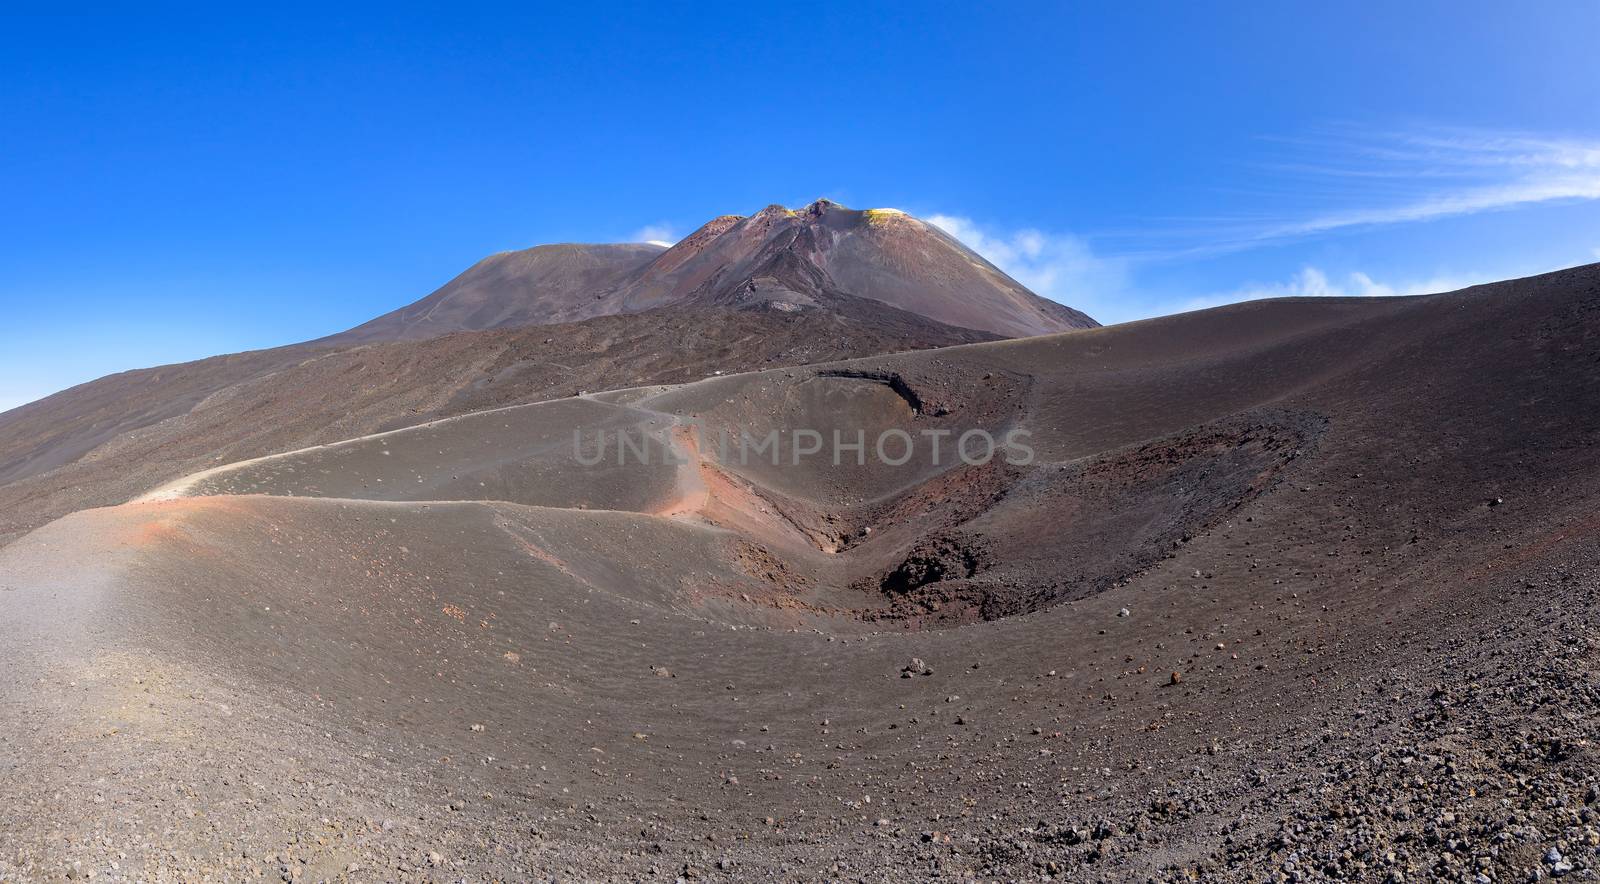 Panoramic view of Etna crater created by eruption in 2002 with main craters in the background, Sicily, Italy